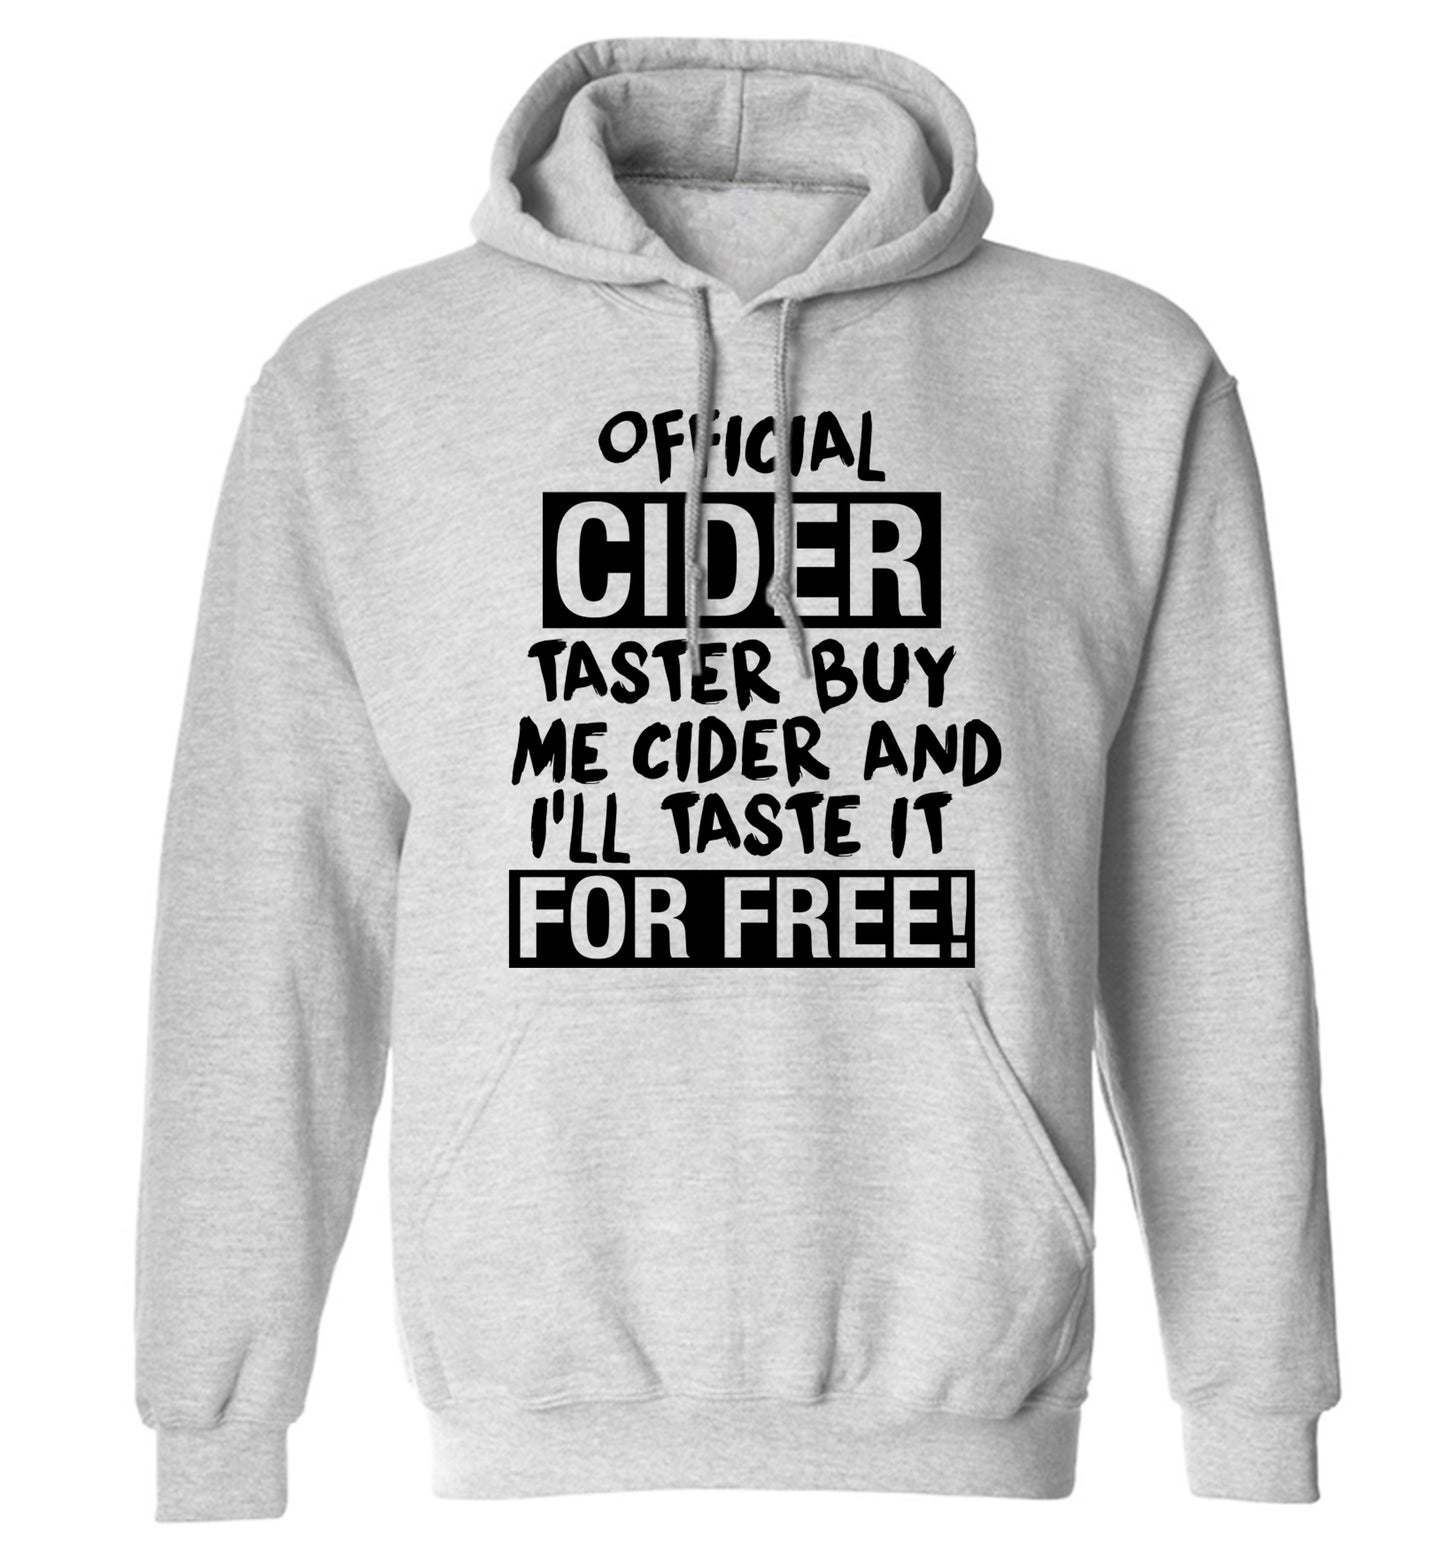 Official cider taster buy me cider and I'll taste it for free! adults unisex grey hoodie 2XL